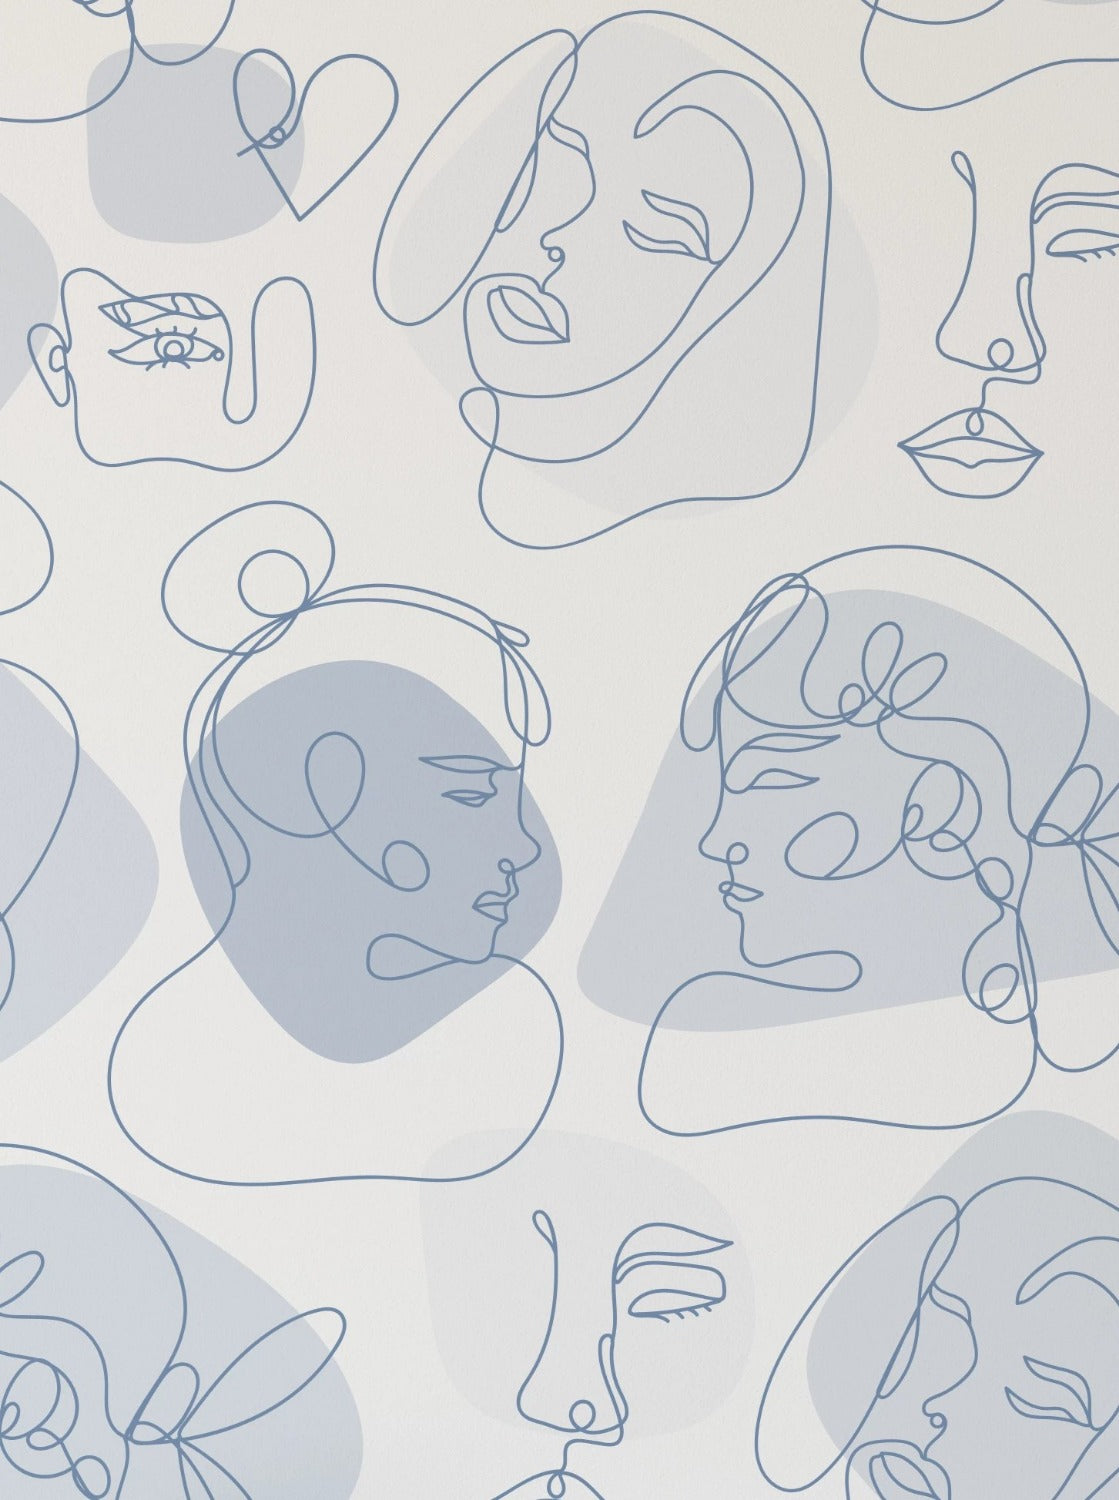 A detailed wallpaper design showcasing abstract line art of various faces in monochromatic blue on a soft gray background. The faces are stylized with simple, continuous lines that form eyes, noses, lips, and decorative elements like flowers and abstract shapes.